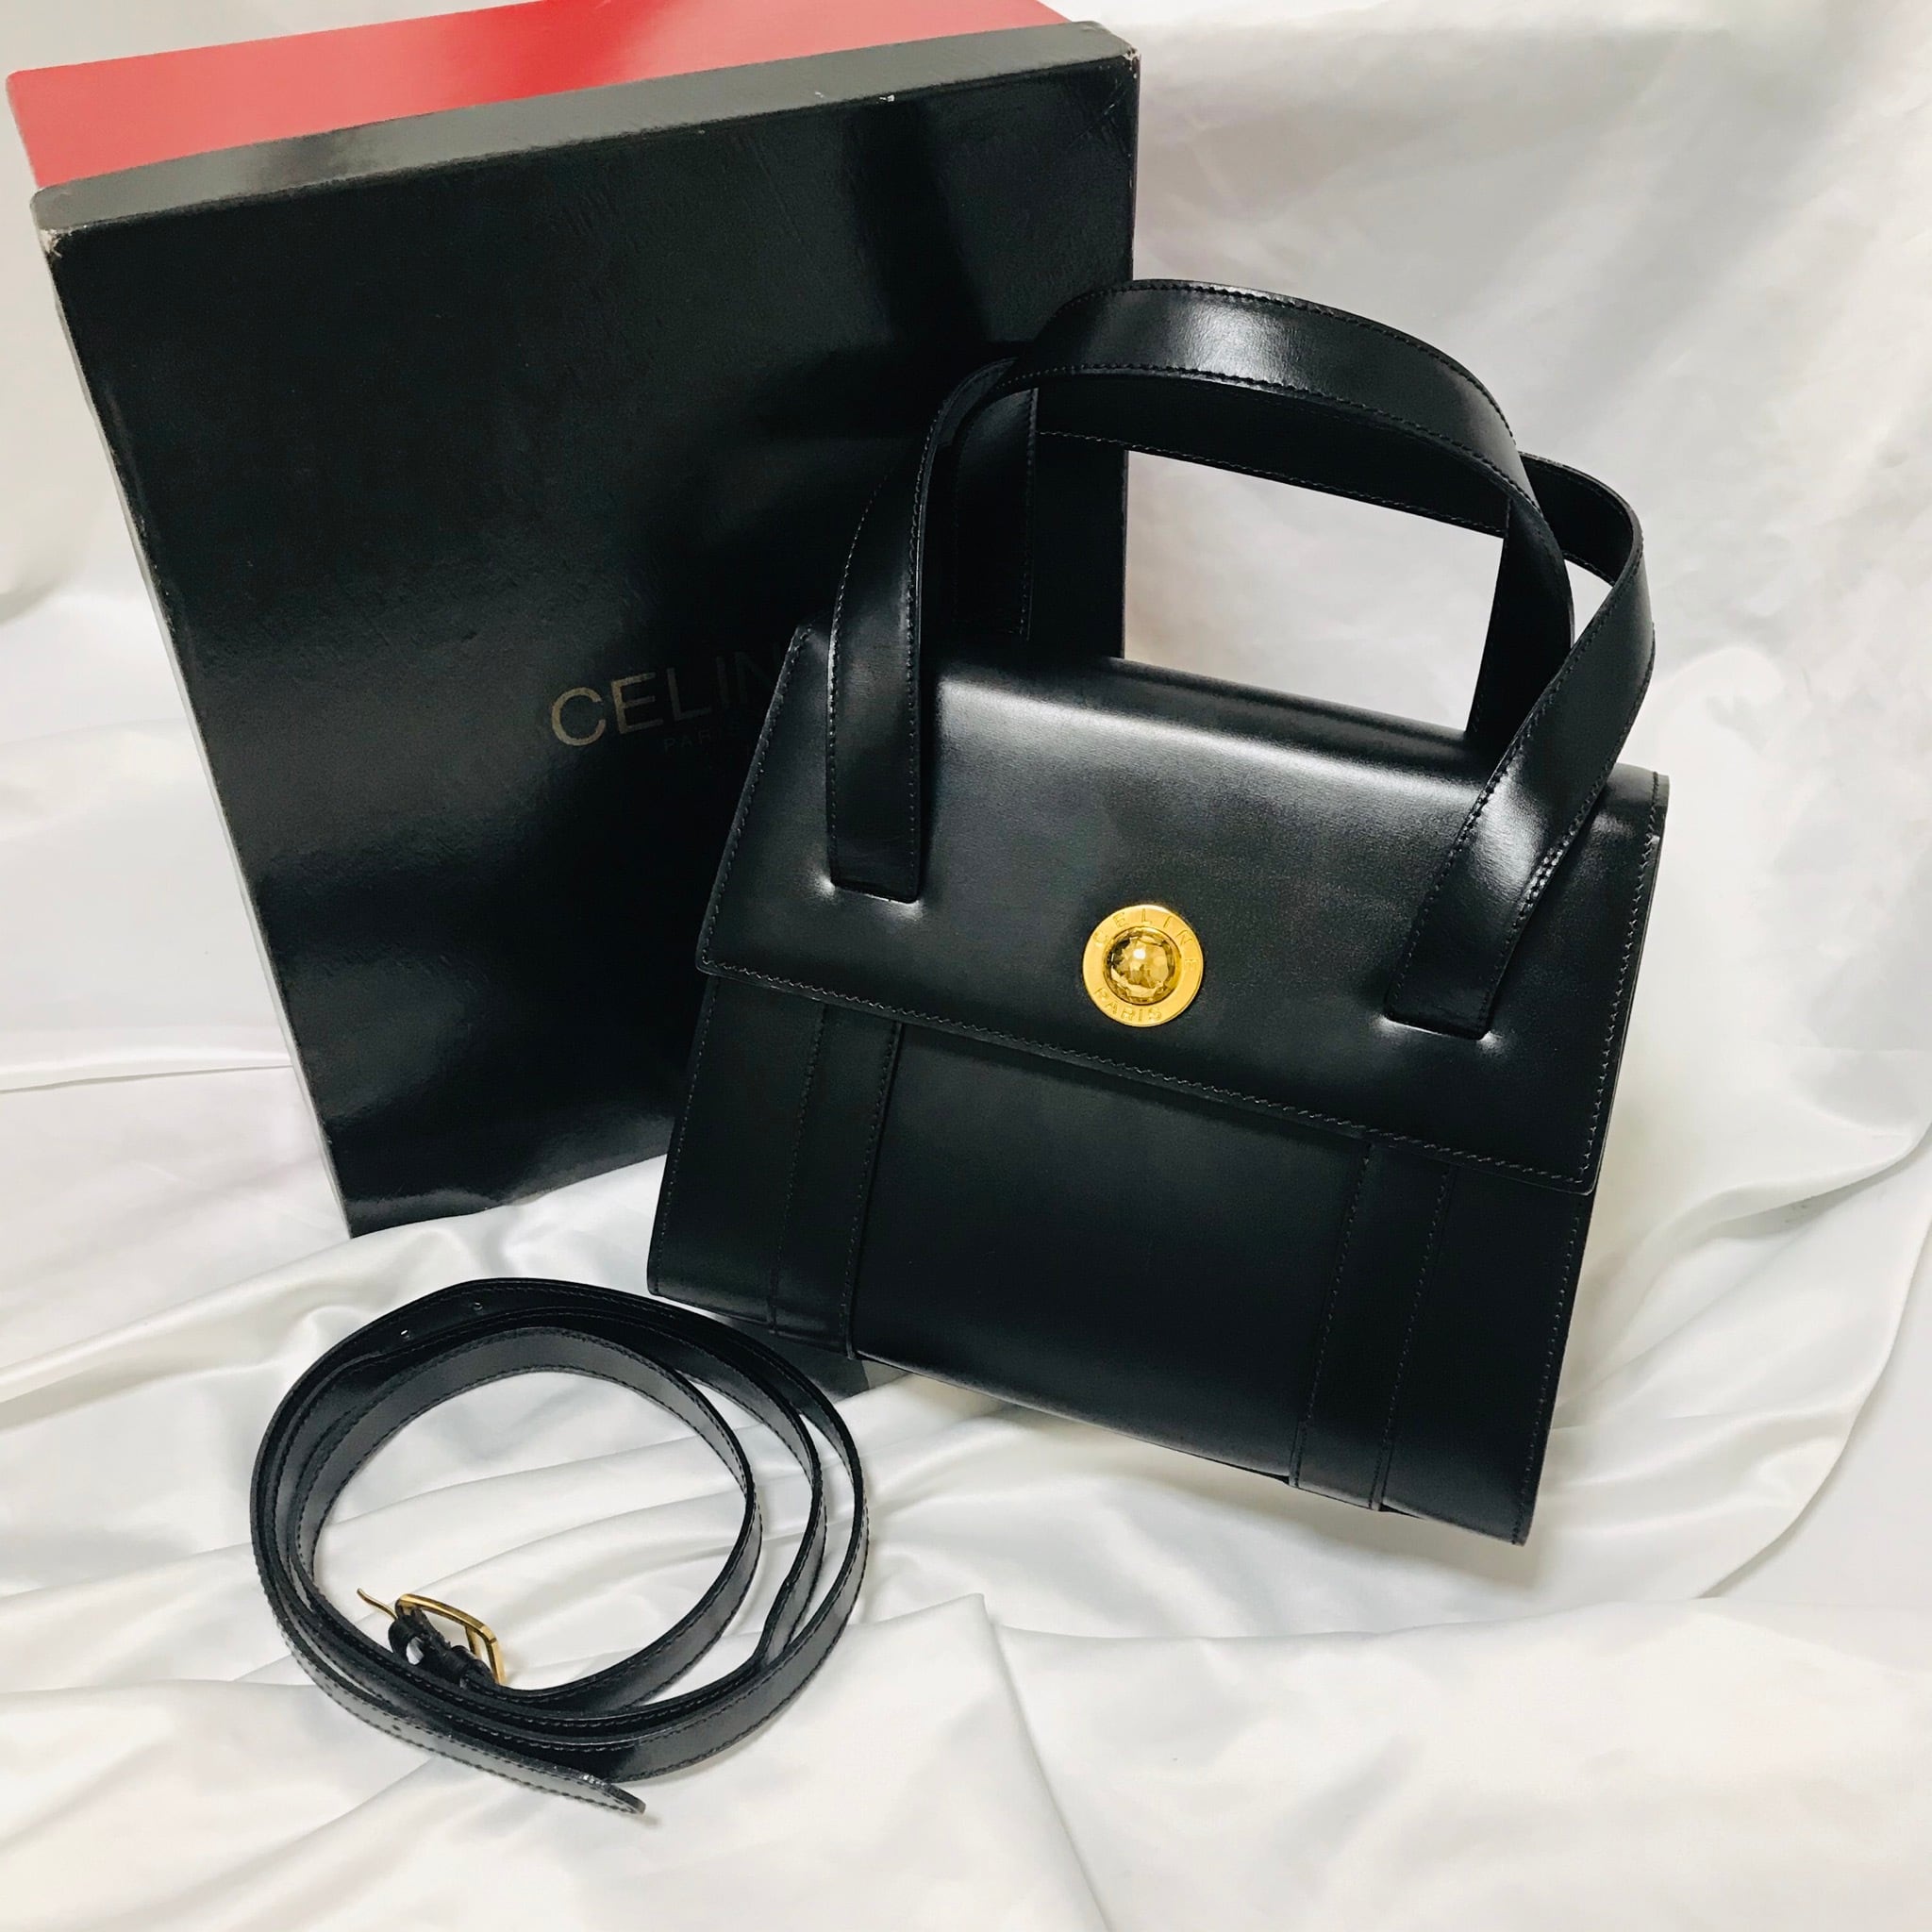 CELINE スターボール 2way バッグ 箱付き celine starballセリーヌ bag | Petit luxe Vintage  powered by BASE